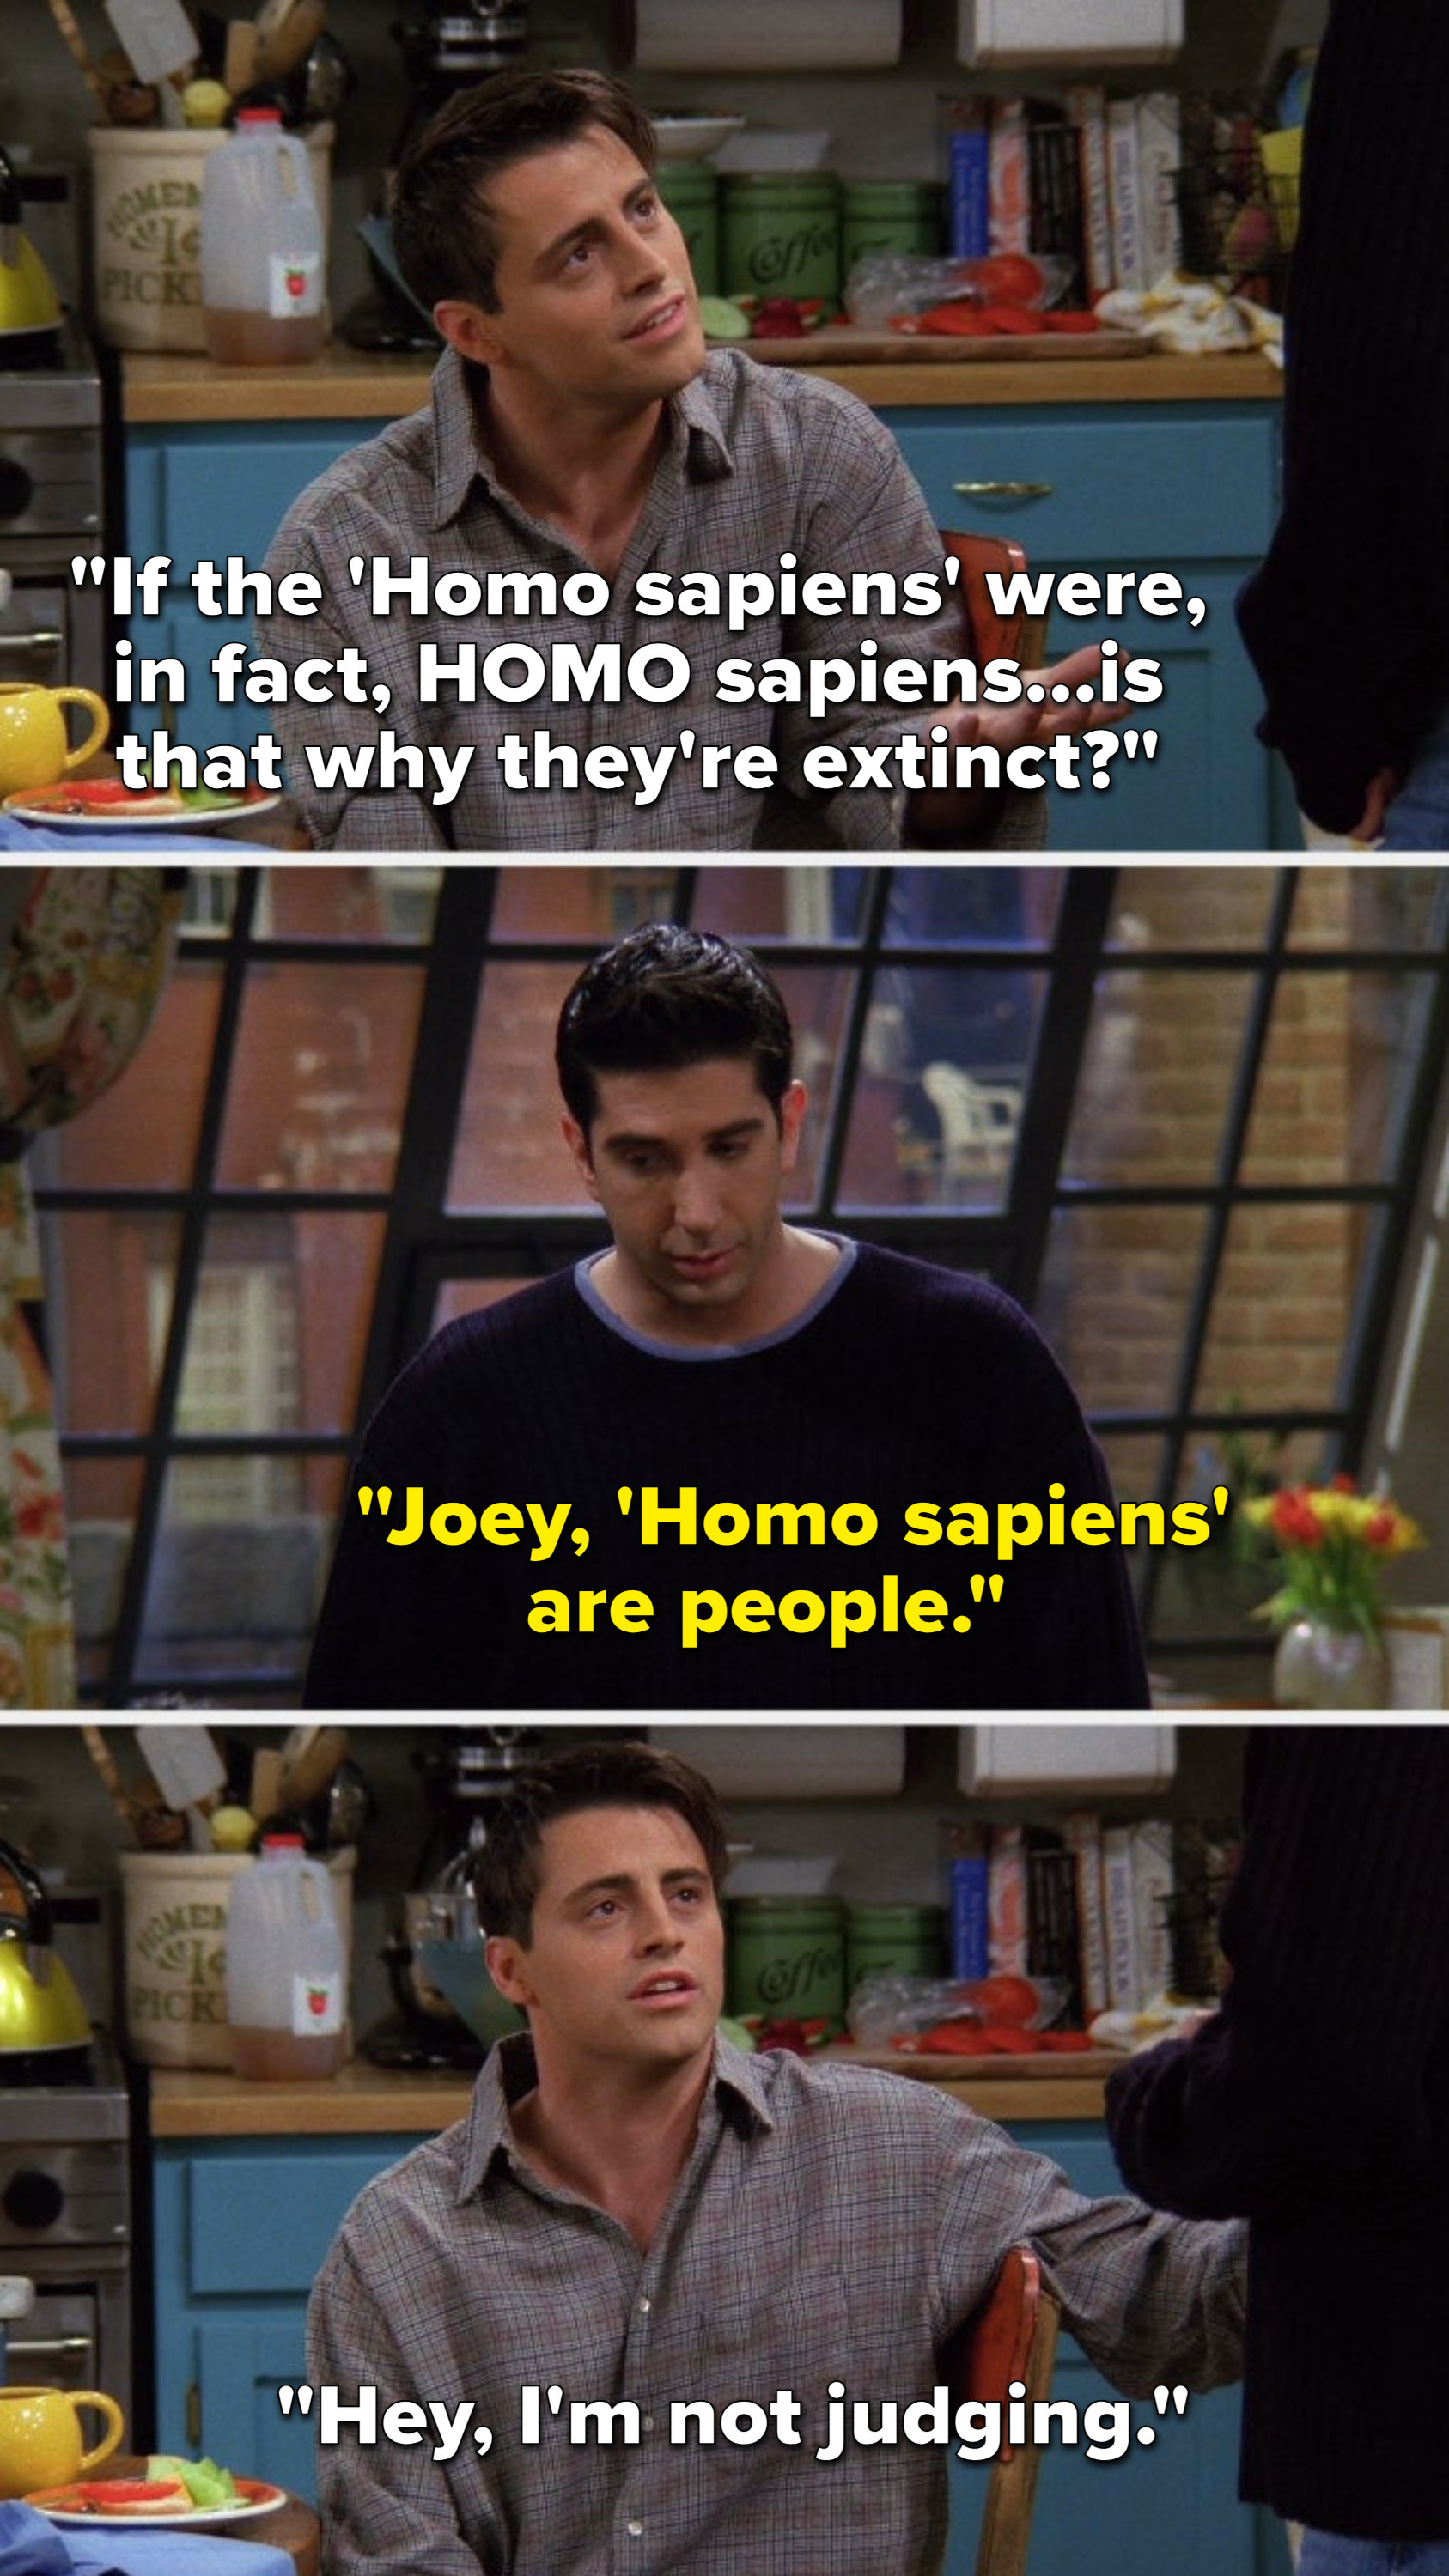 Joey says, &quot;If the &#x27;Homo sapiens&#x27; were, in fact, HOMO sapiens...is that why they&#x27;re extinct,&quot; Ross says, Joey, &#x27;Homo sapiens&#x27; are people,&quot; and Joey says, &quot;Hey, I&#x27;m not judging&quot;